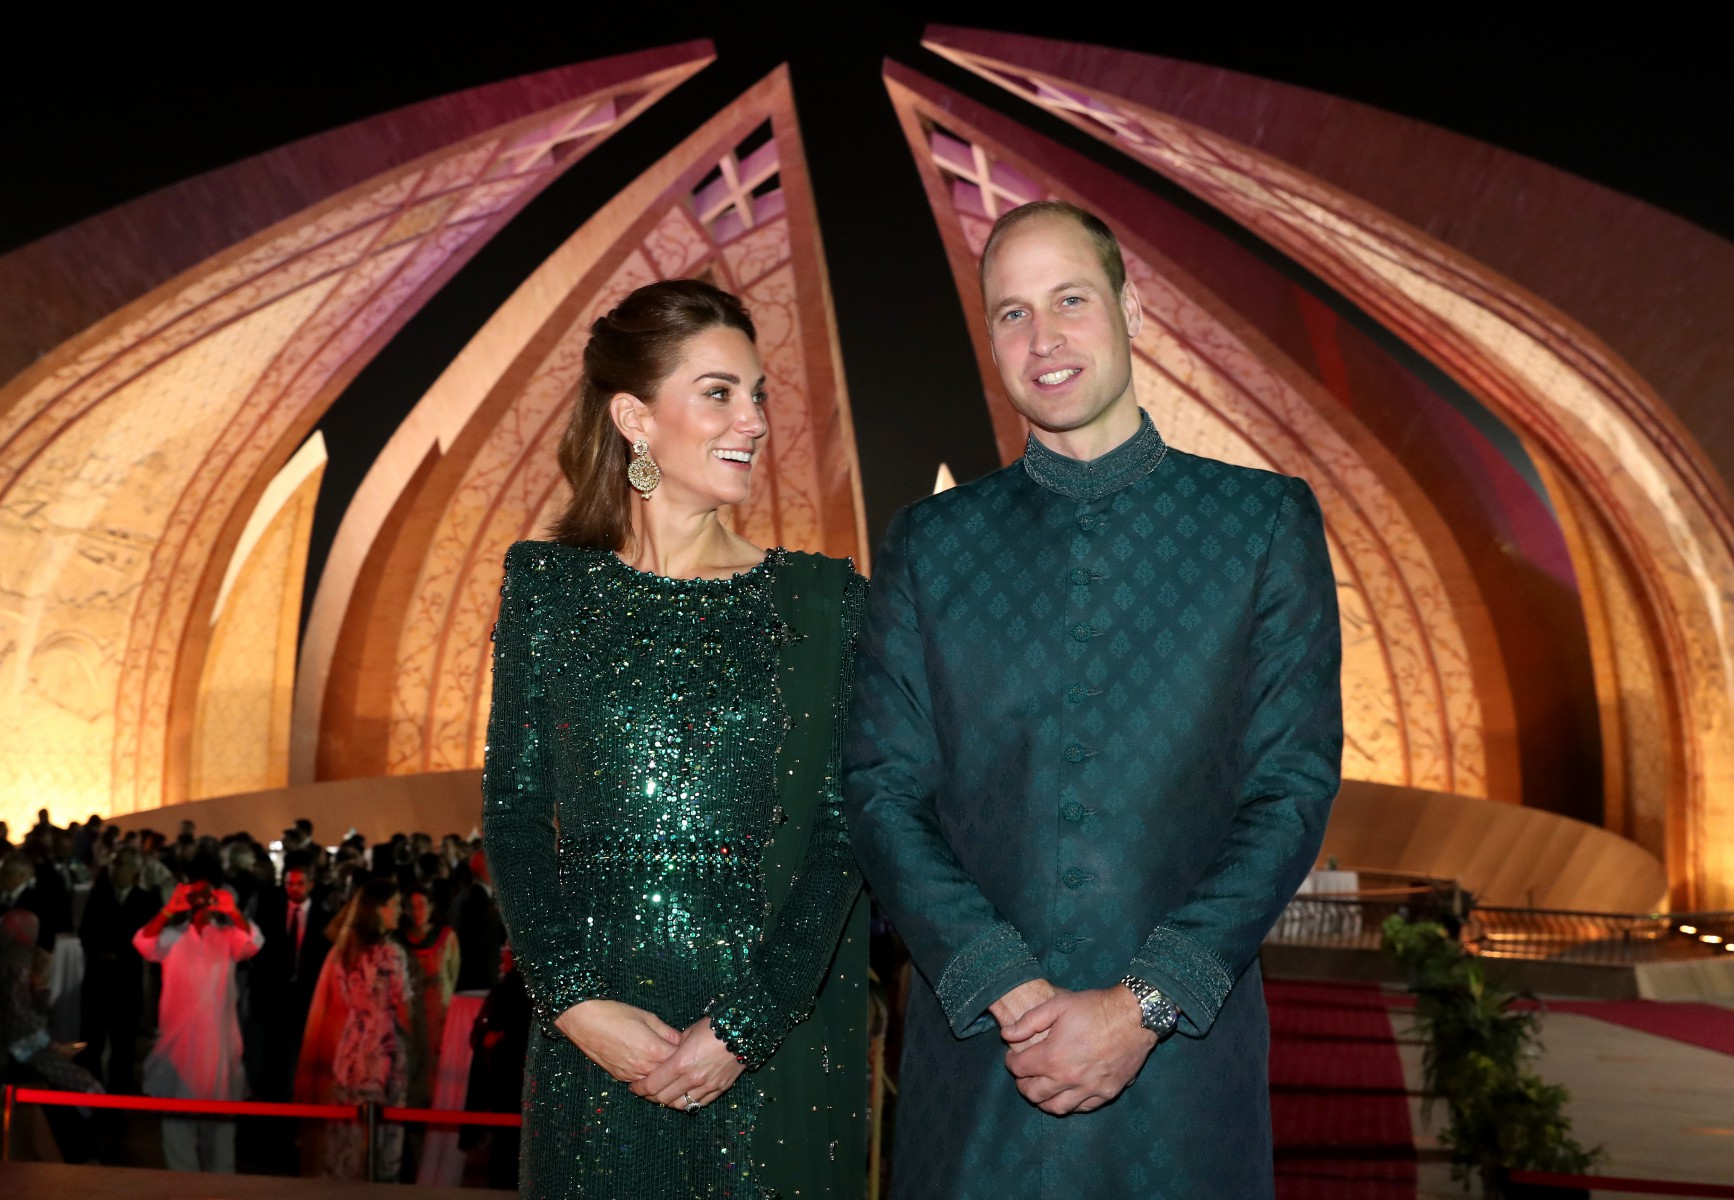 The royal couple attended a special reception hosted by the British High Commissioner at the Pakistan National Monument, during day two of their royal tour